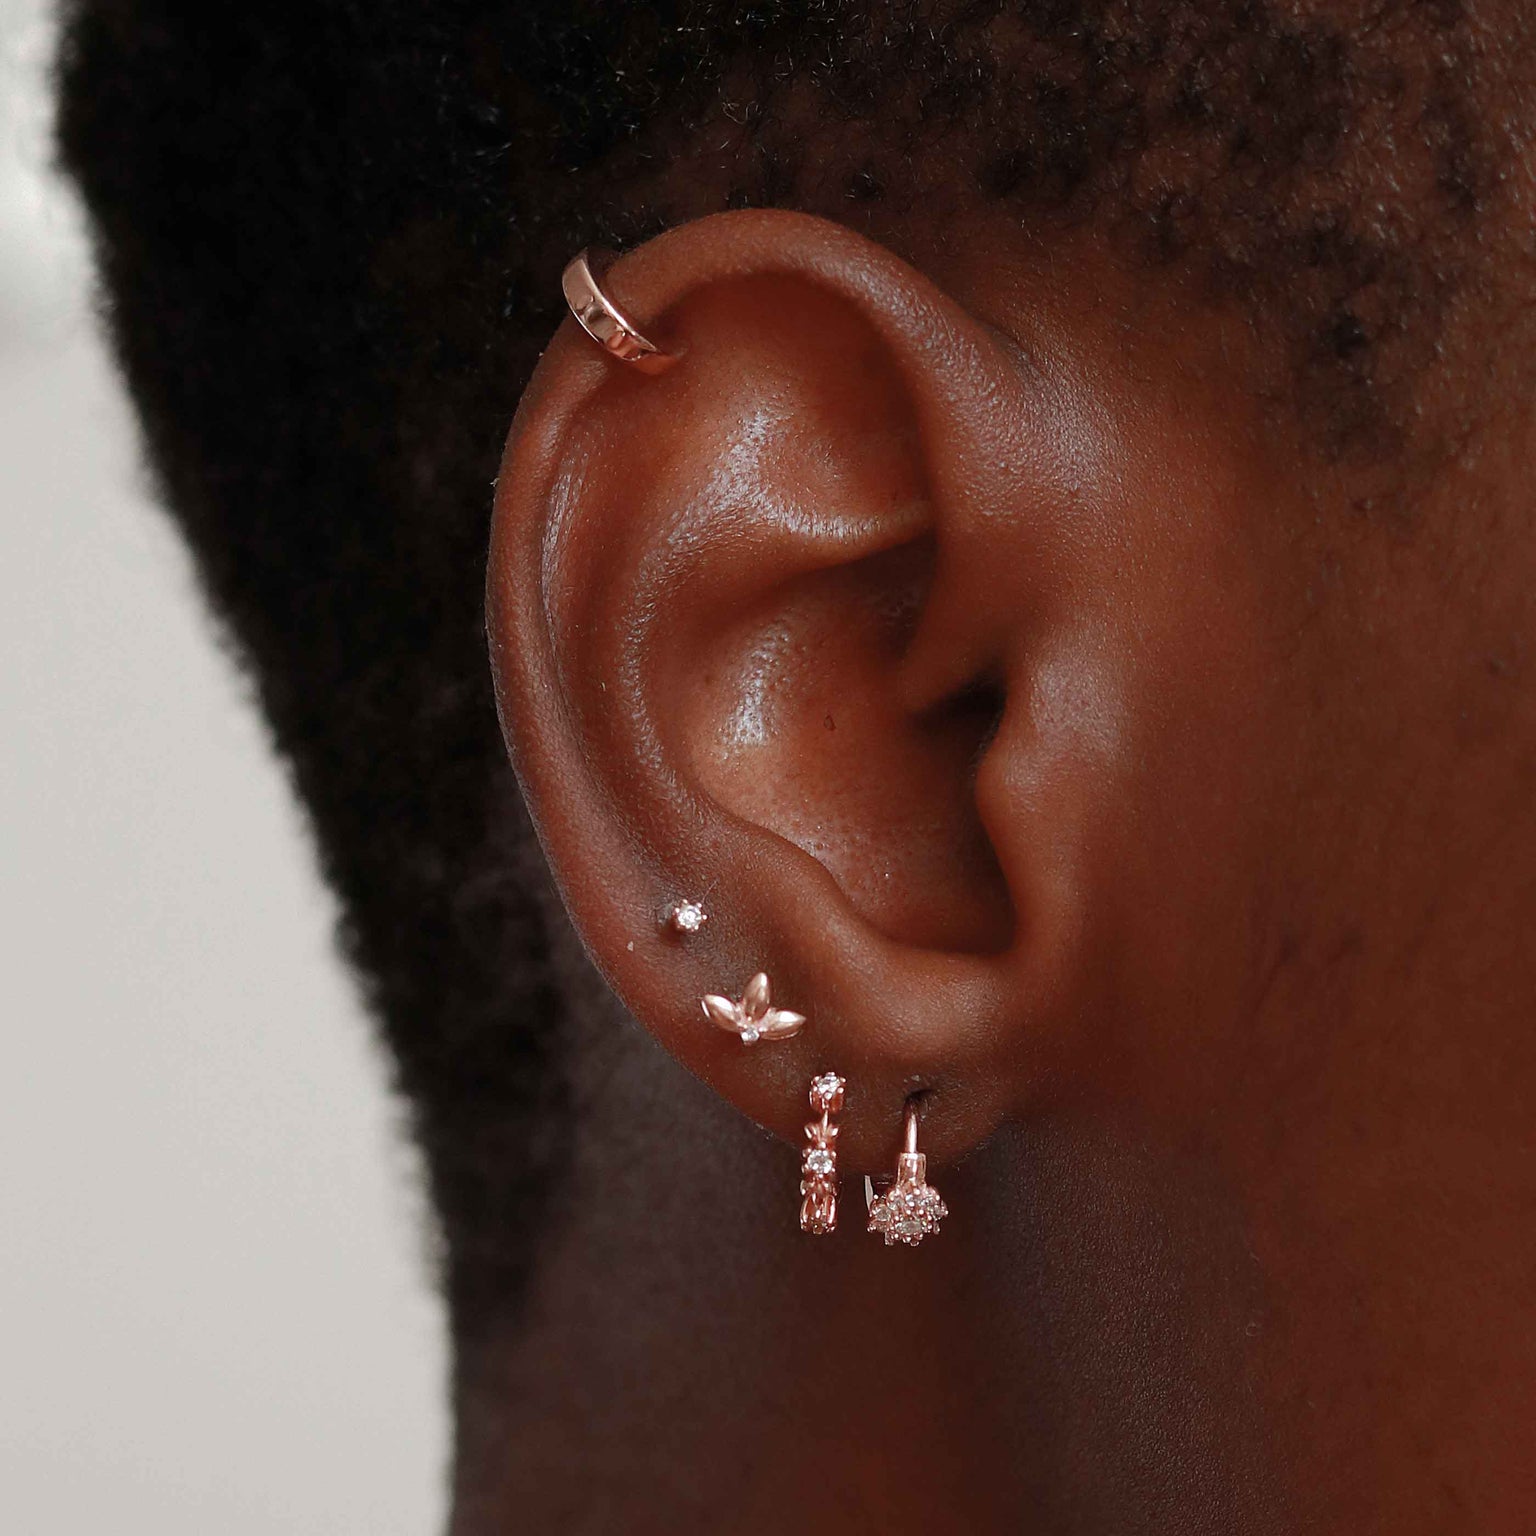 Flora Tiny Barbell in Rose Gold worn in fourth lobe piercing